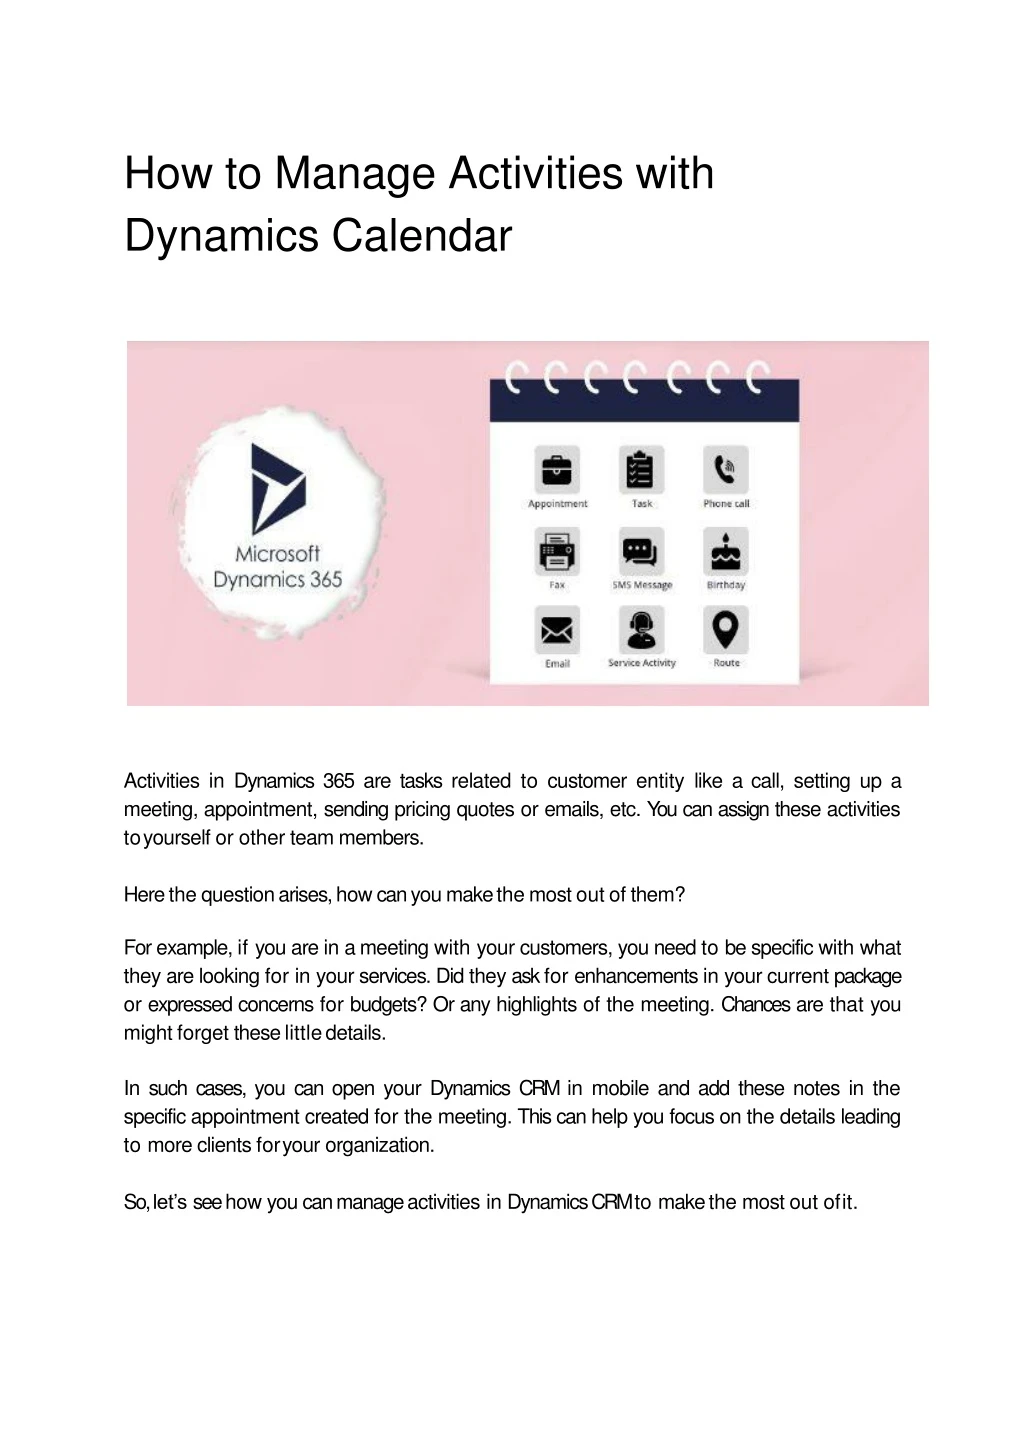 how to manage activities with dynamics calendar